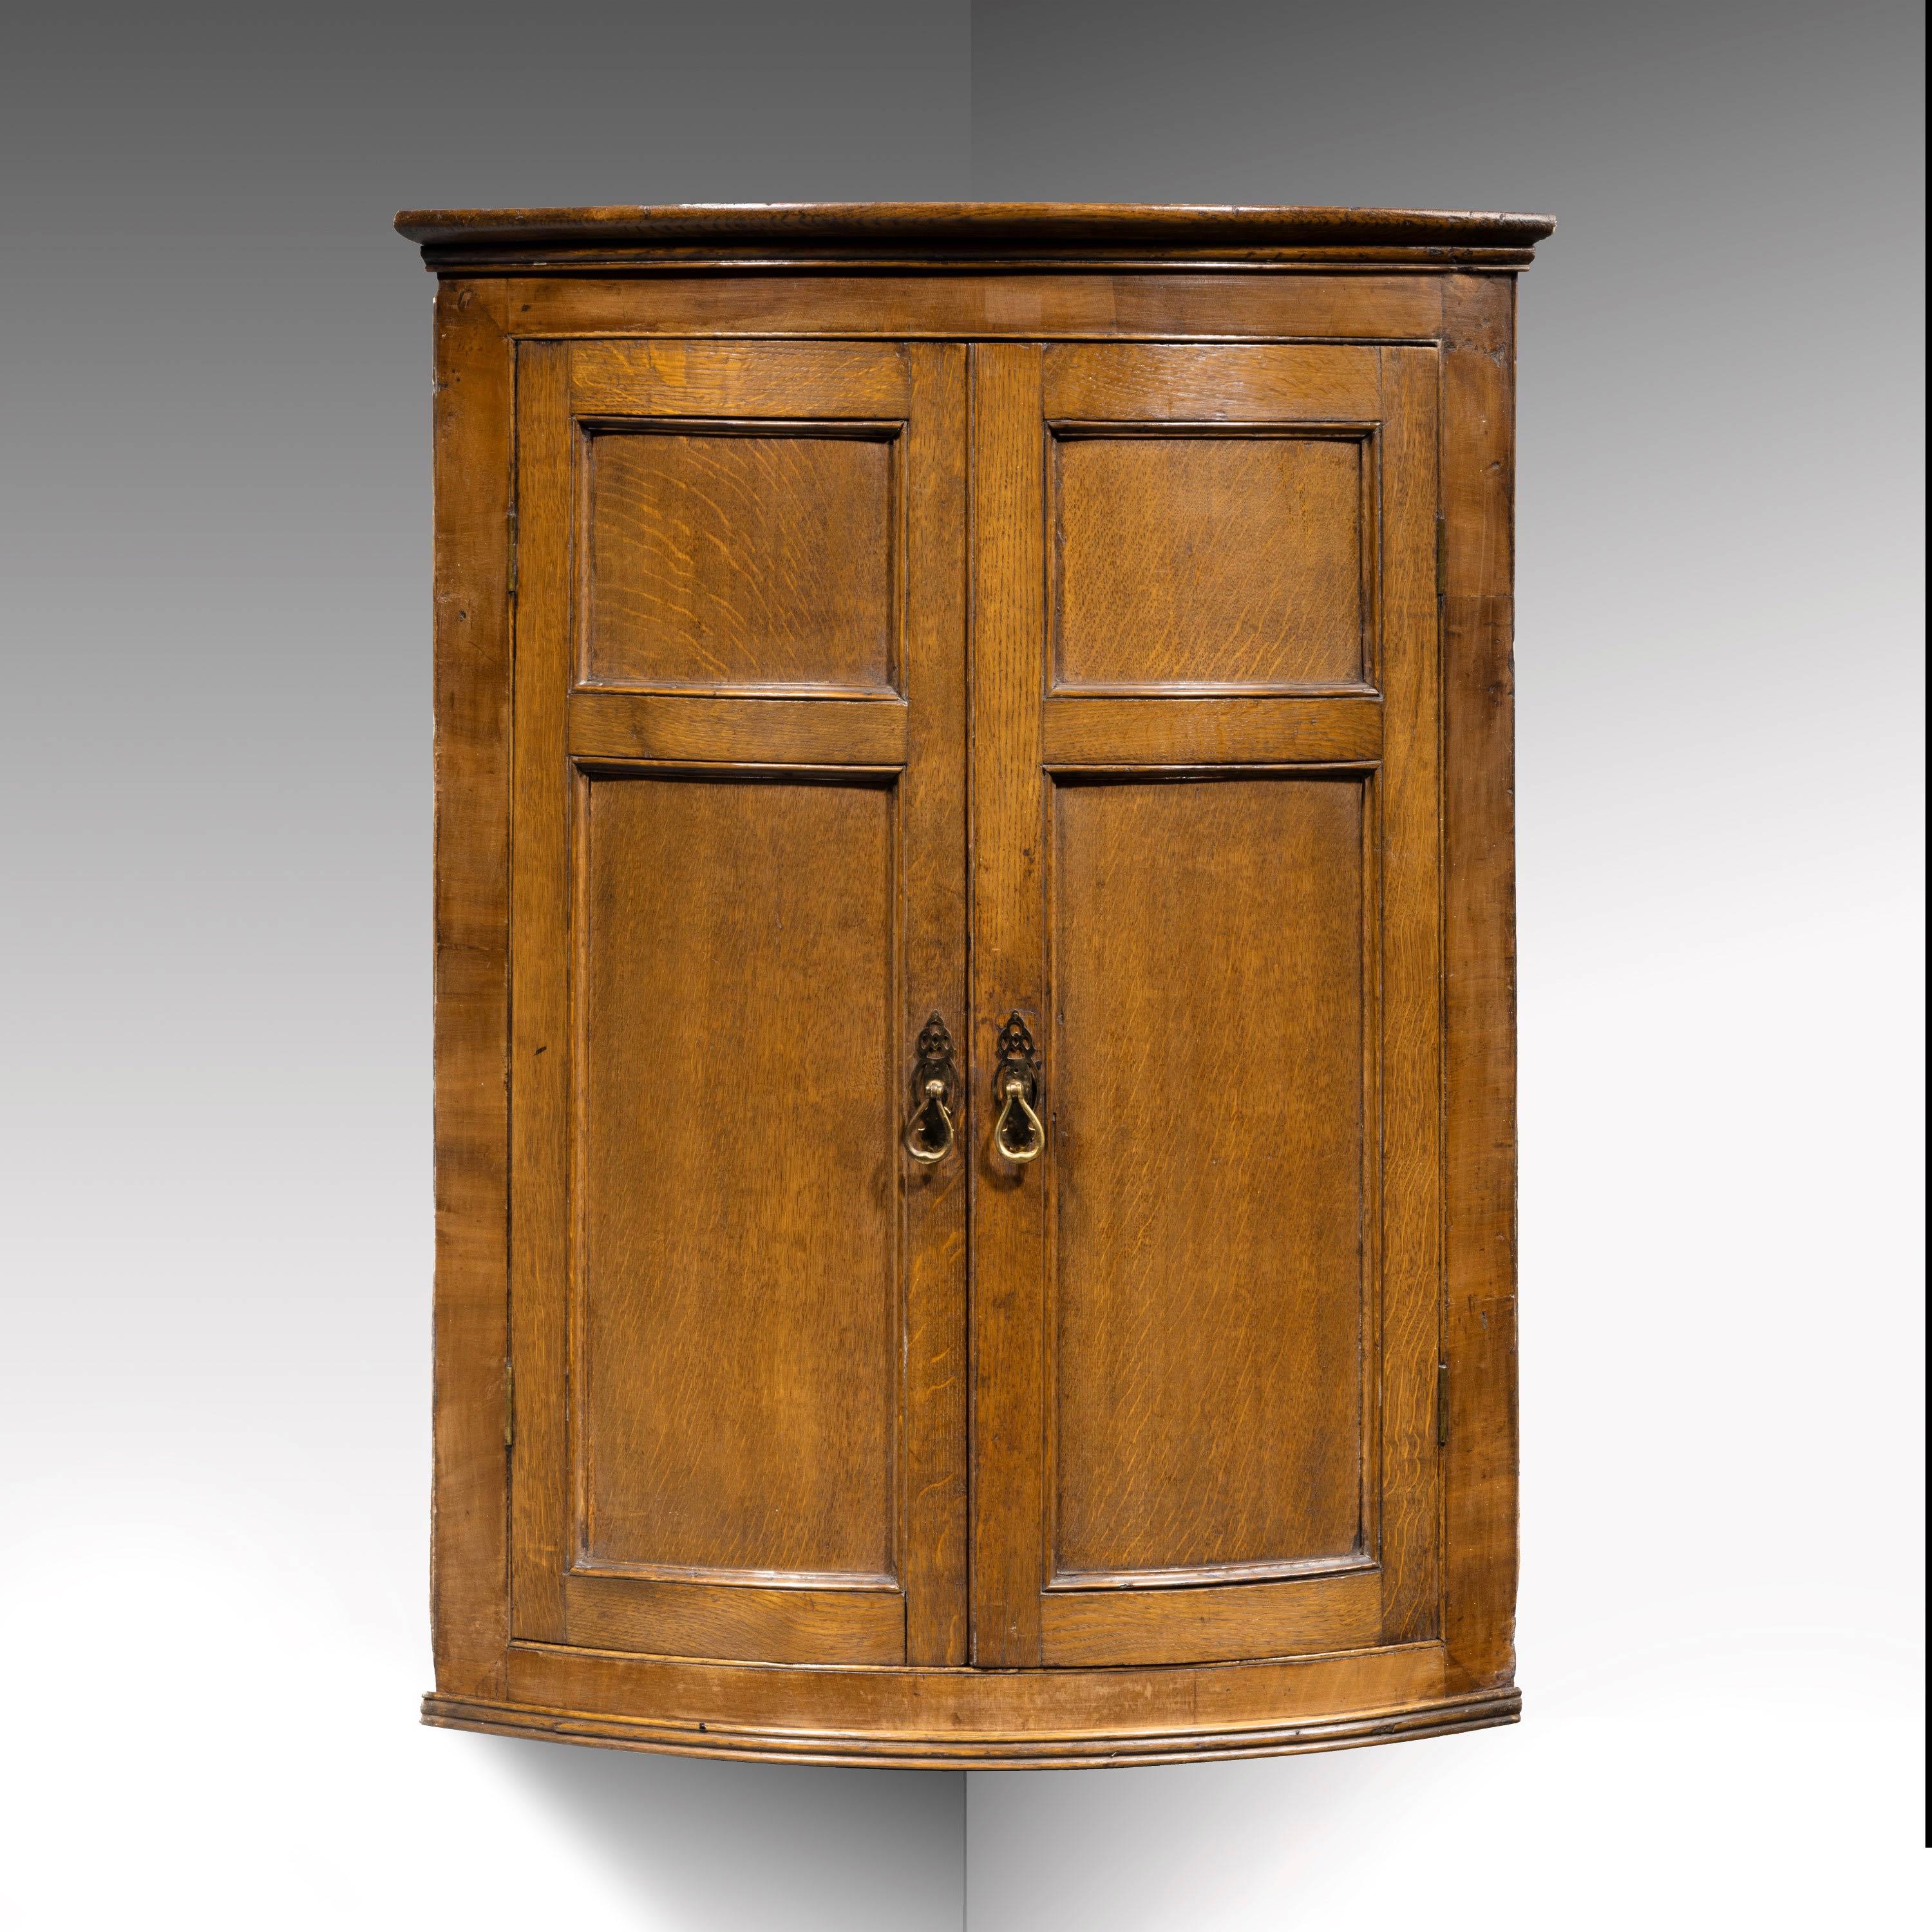 18th Century Handsome George III Period Oak Bow-Fronted Corner Cupboard